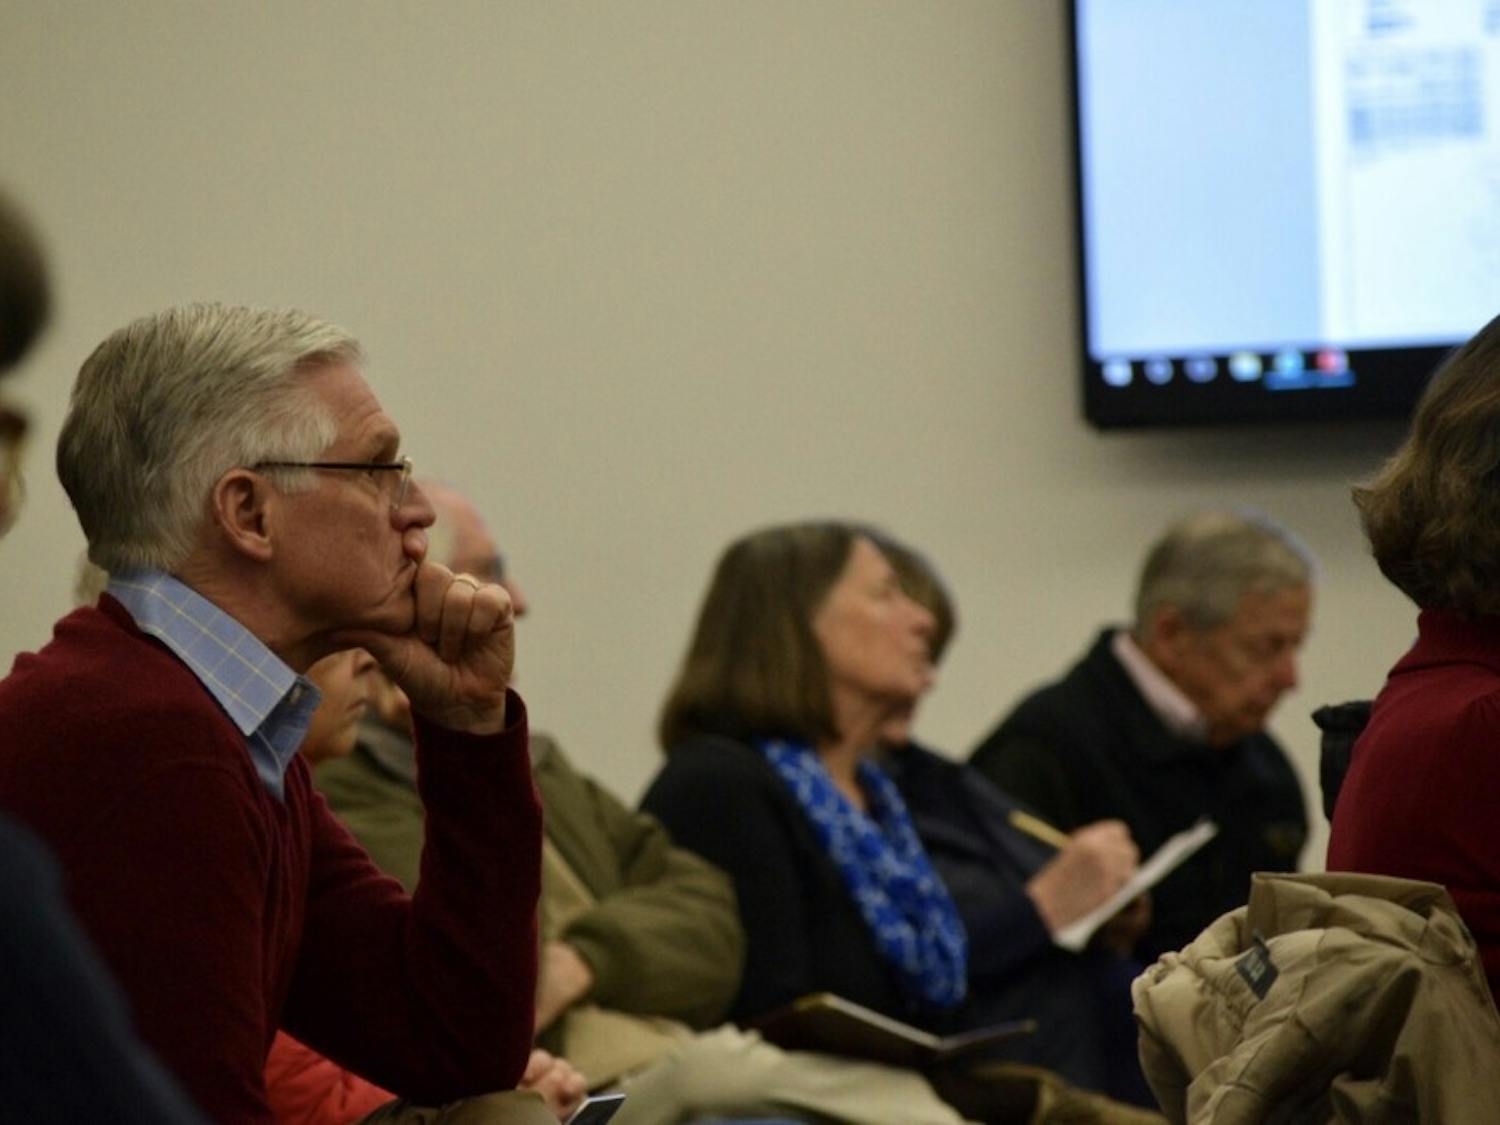 Citizens gather at the Chapel Hill Public Library to discuss the plans of the implementation of Wegman's, a supermarket chain, in Chapel Hill and traffic concerns on Monday, Feb. 25, 2019.